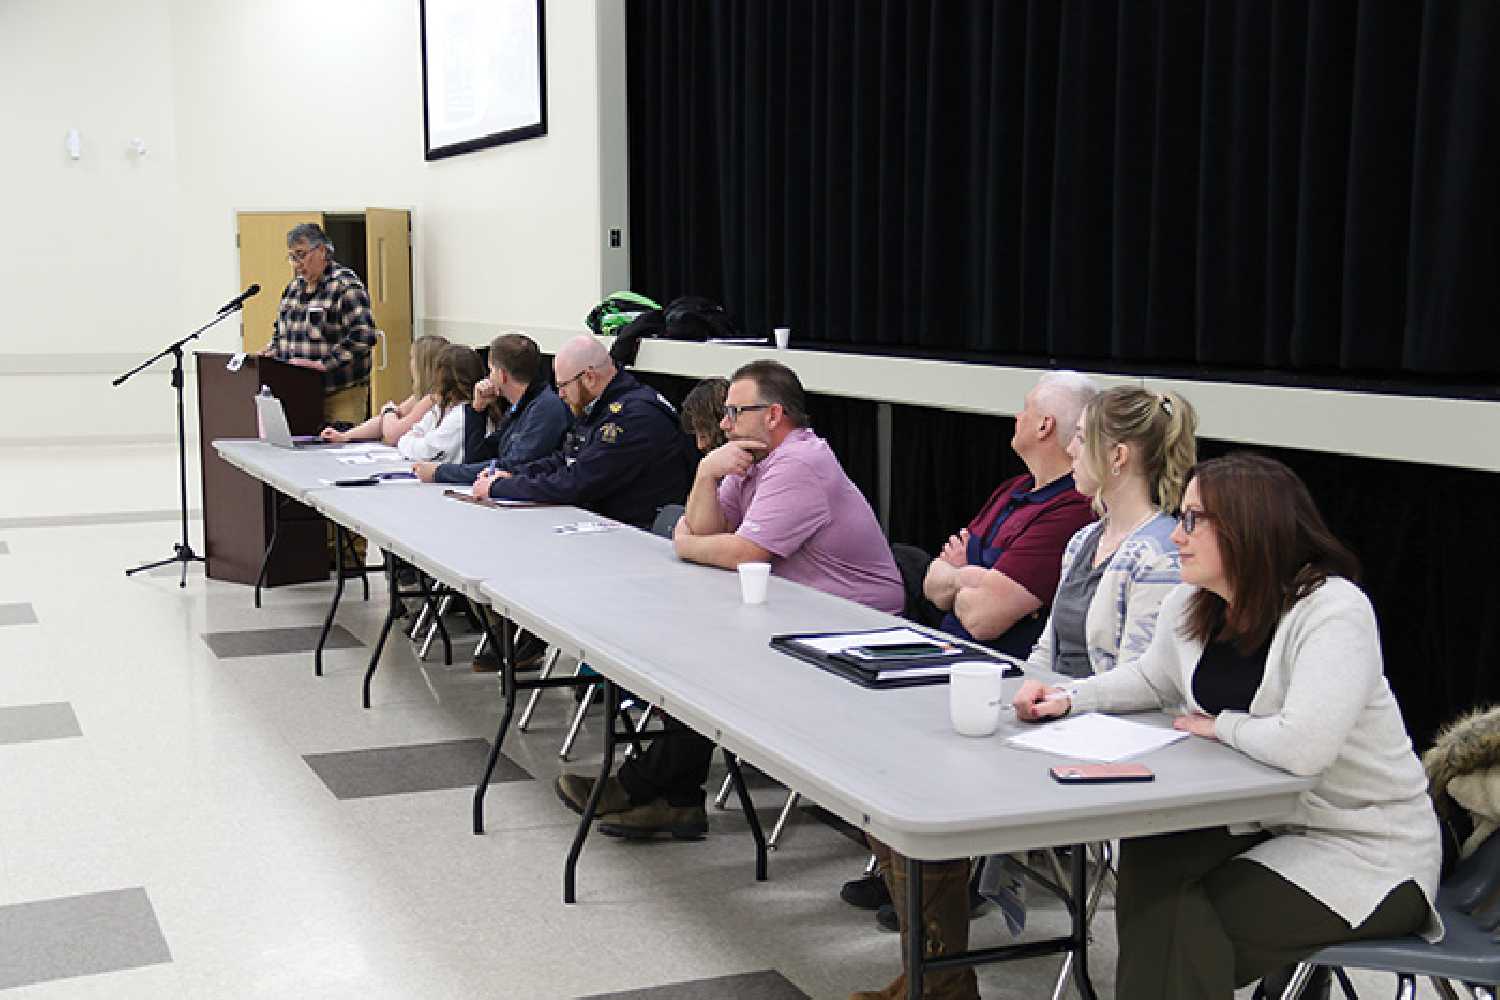 The Rocanville Economic Development Organization hosted a community meeting on Feb. 27 to update the community on what is happening with the town, REDO, the RM, Rocanville Rec, Nutrien, the daycare, the school, and the Moosomin RCMP. Reps were on hand from all of those organizations, and gave a brief update. The meeting ended with a question and idea session from the floor. <b>From left are </b>Stan Langley at the podium with REDO, Kelsey Selby with REDO, Julia Roden with the SRC, Nathan Bromm with Rocanville School, Sgt. Damien Grouchy with the Moosomin RCMP, Reeve Melissa Ruhland with the RM